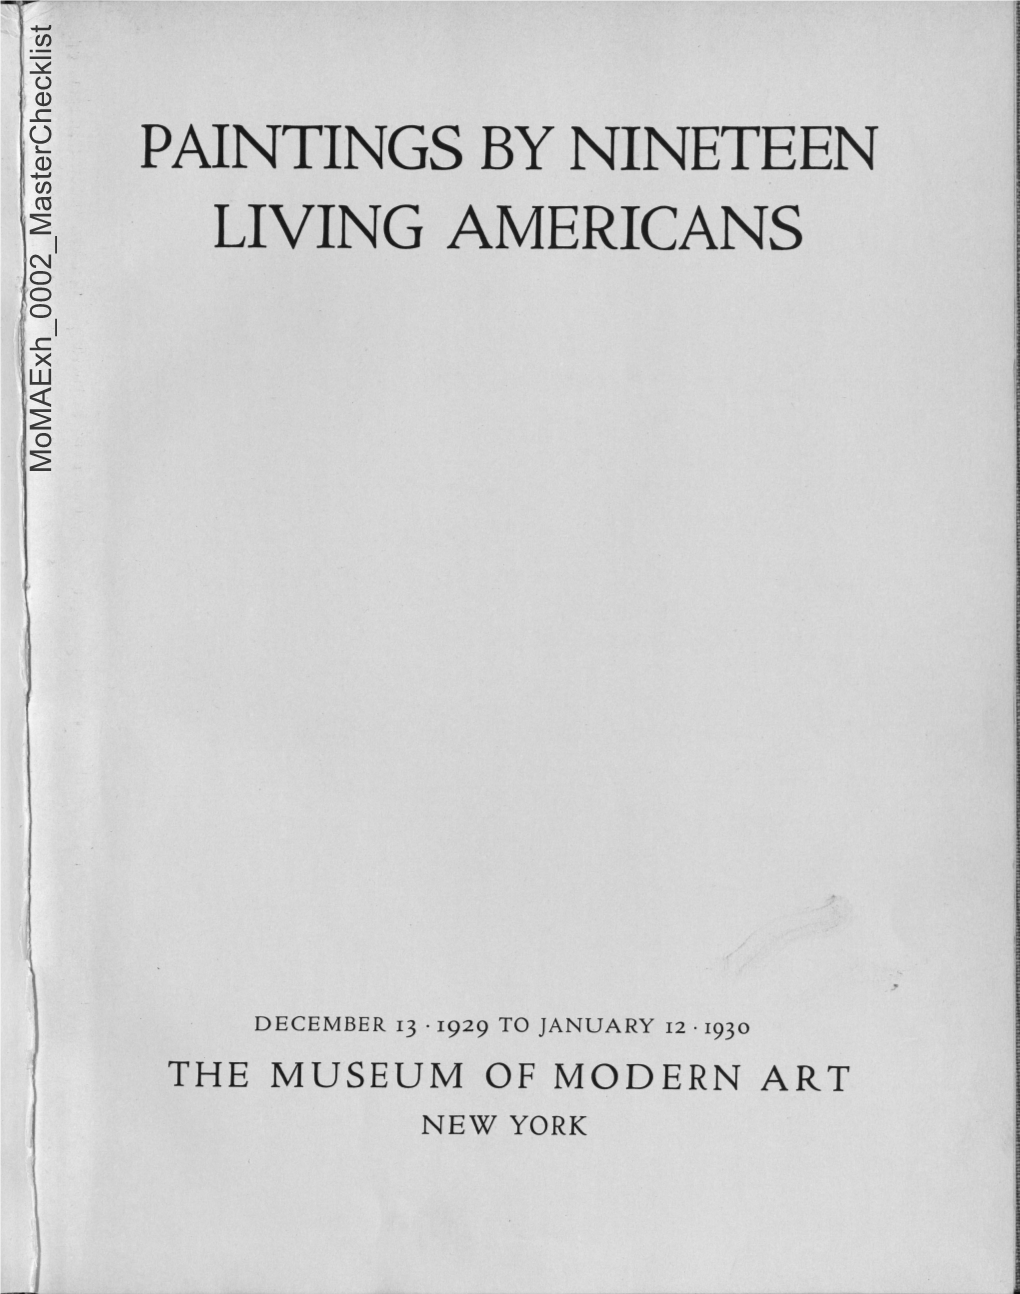 PAINTINGS by NINETEEN LIVING AMERICANS Momaexh 0002 Masterchecklist